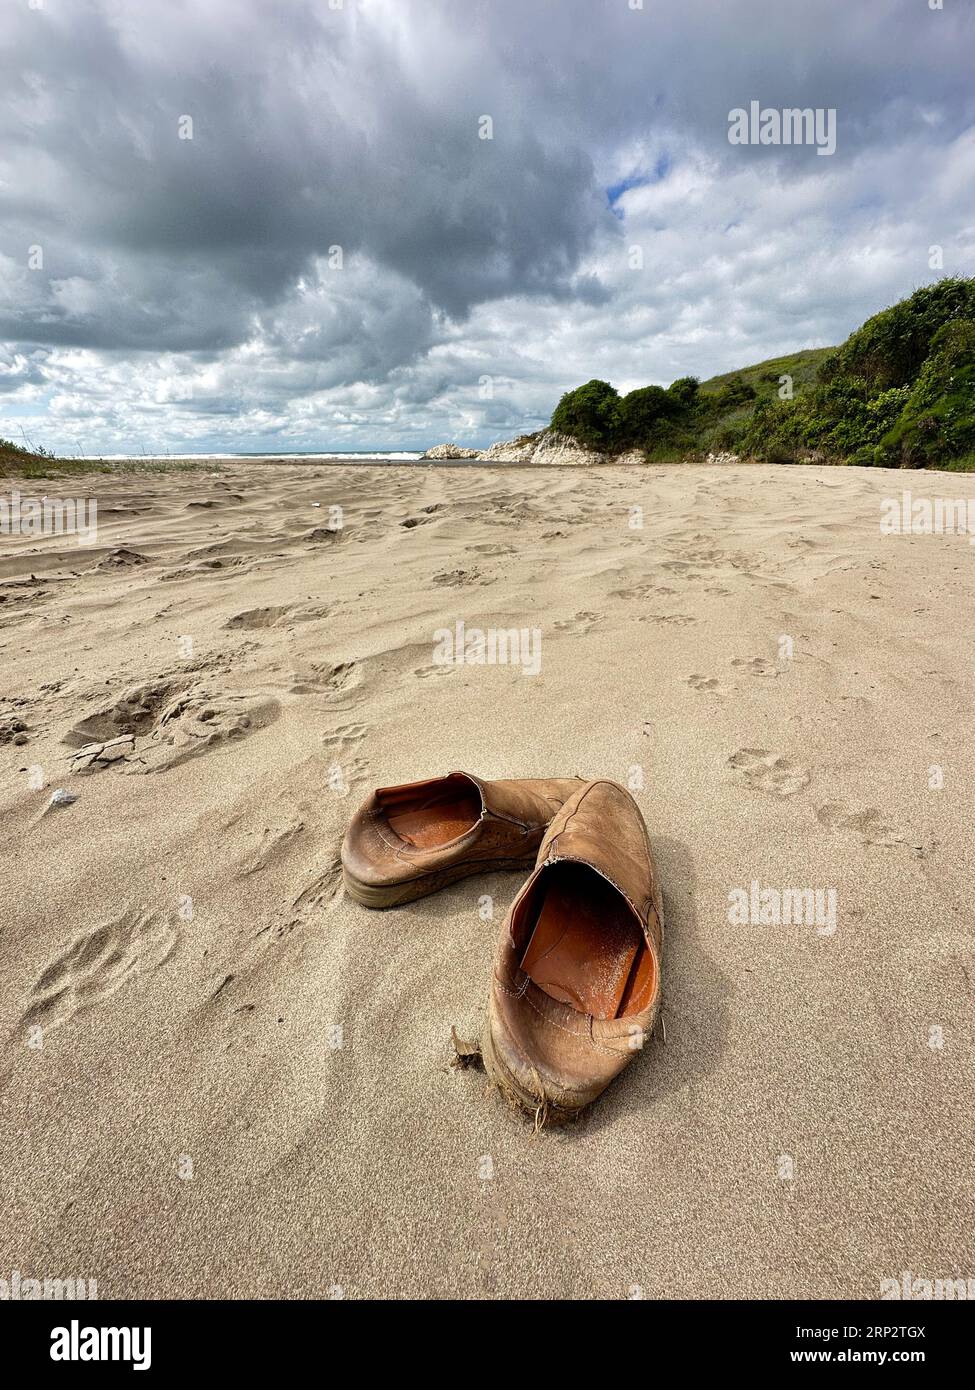 Human waste in nature. Old men's shoes on the beach. Beach rubbish Stock Photo